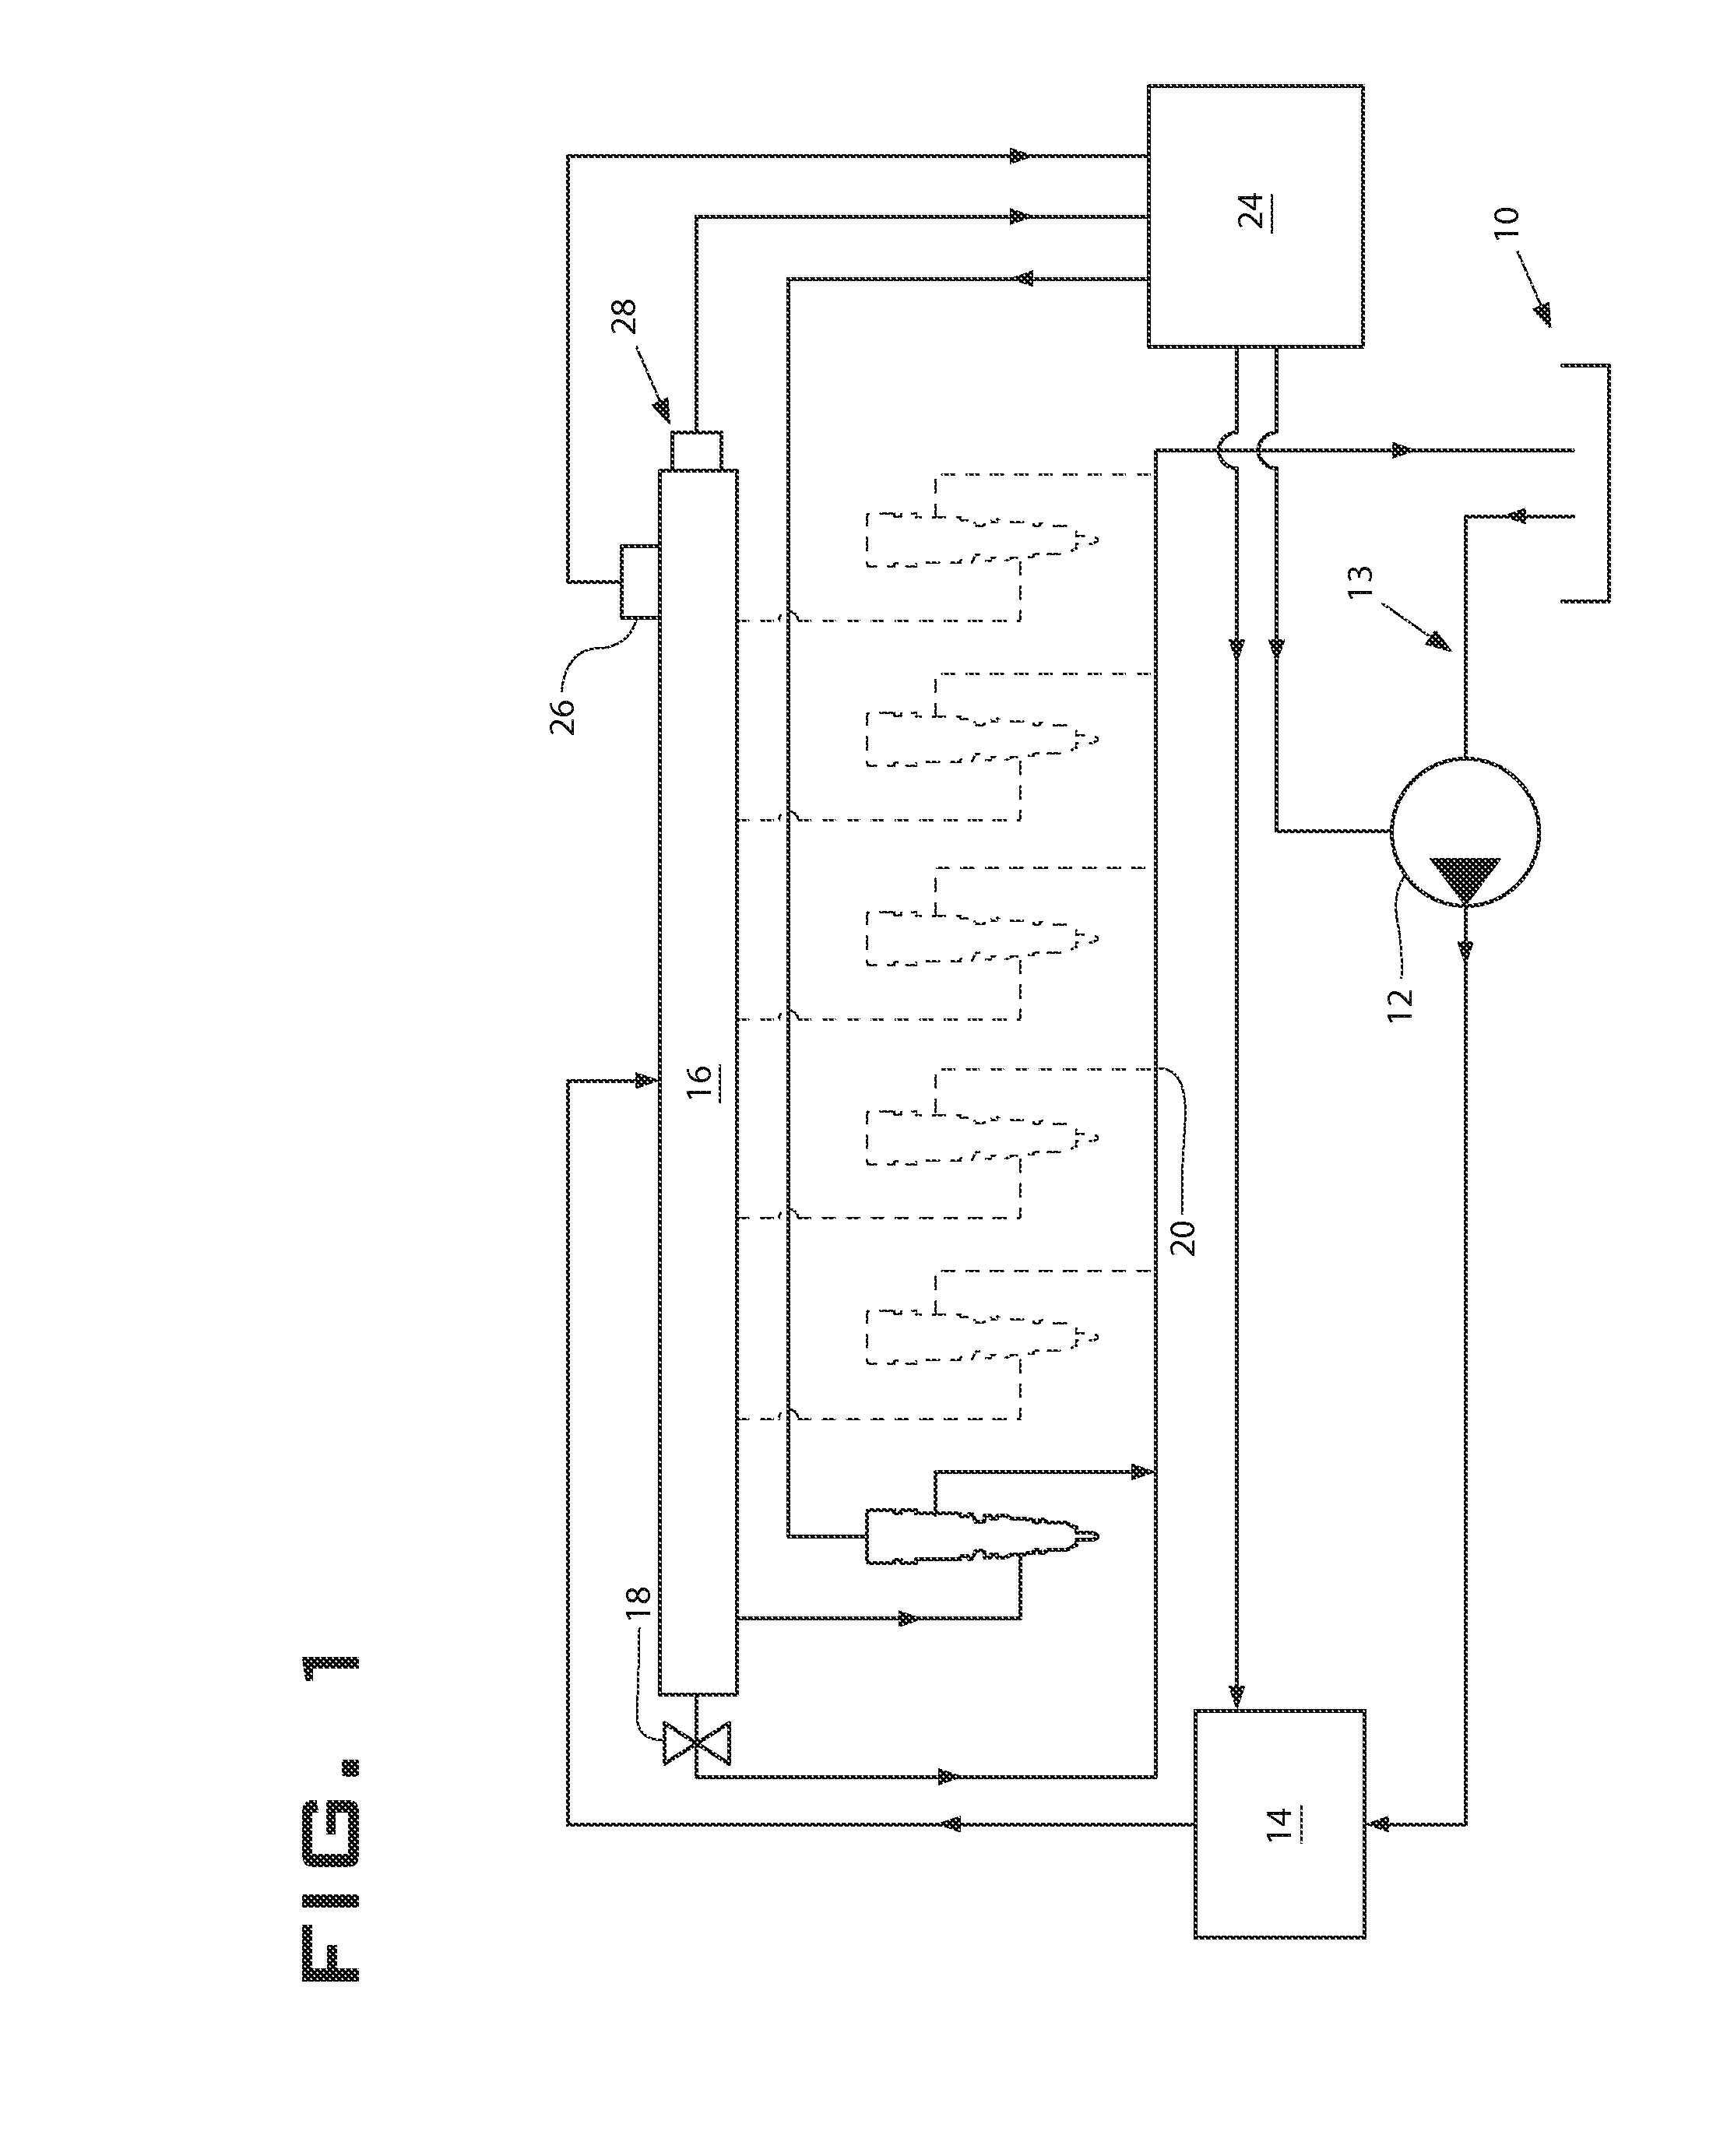 Fluid injector with rate shaping capability